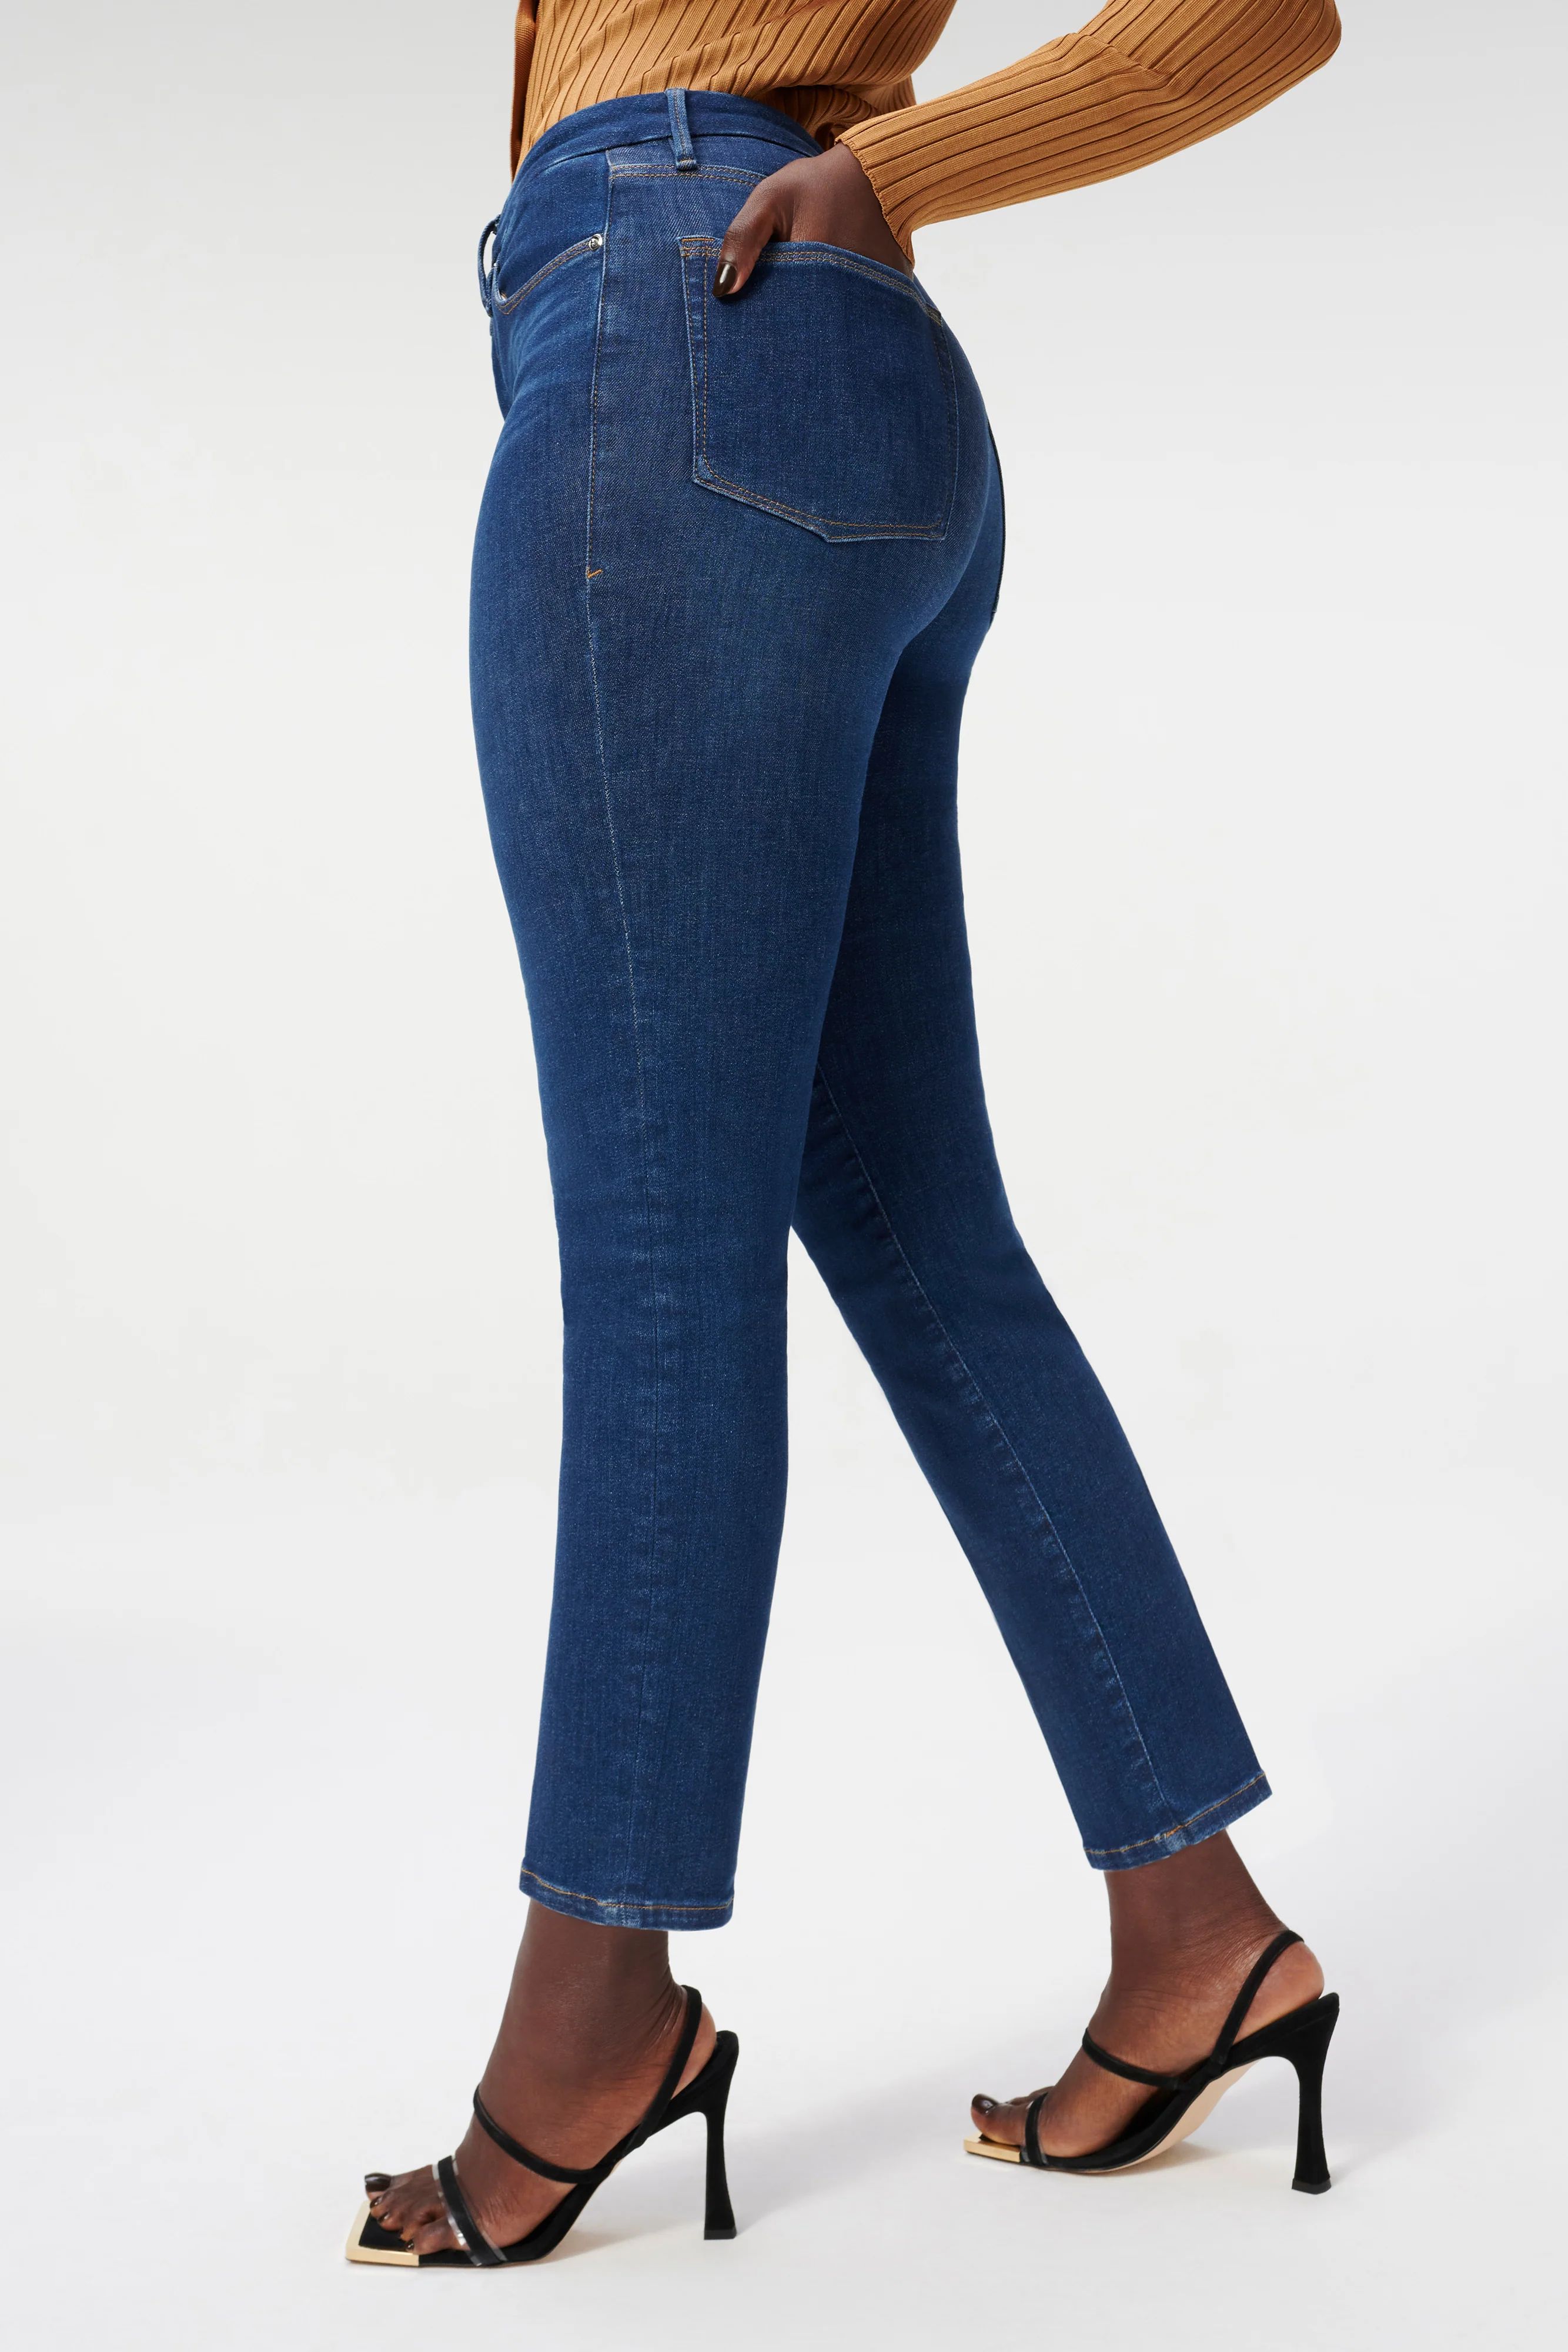 ALWAYS FITS GOOD CLASSIC JEANS | BLUE822 | Good American